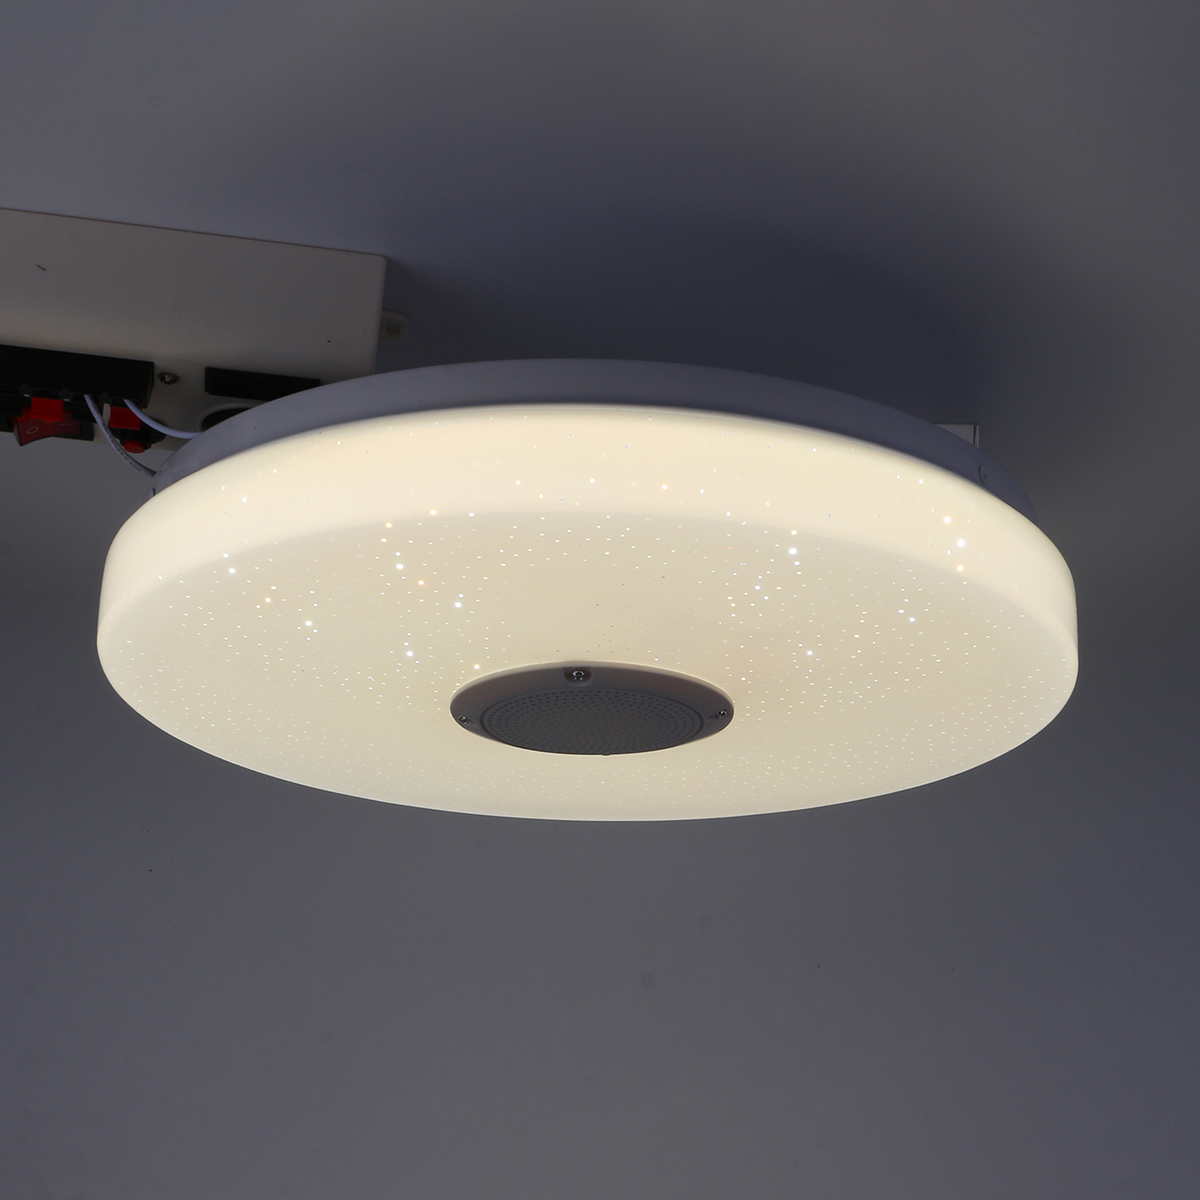 33cm-LED-Ceiling-Lights-Colorful-DownLight-Lamp-Smart-Control-bluetooth-WIFI-APP-Home-1722354-12